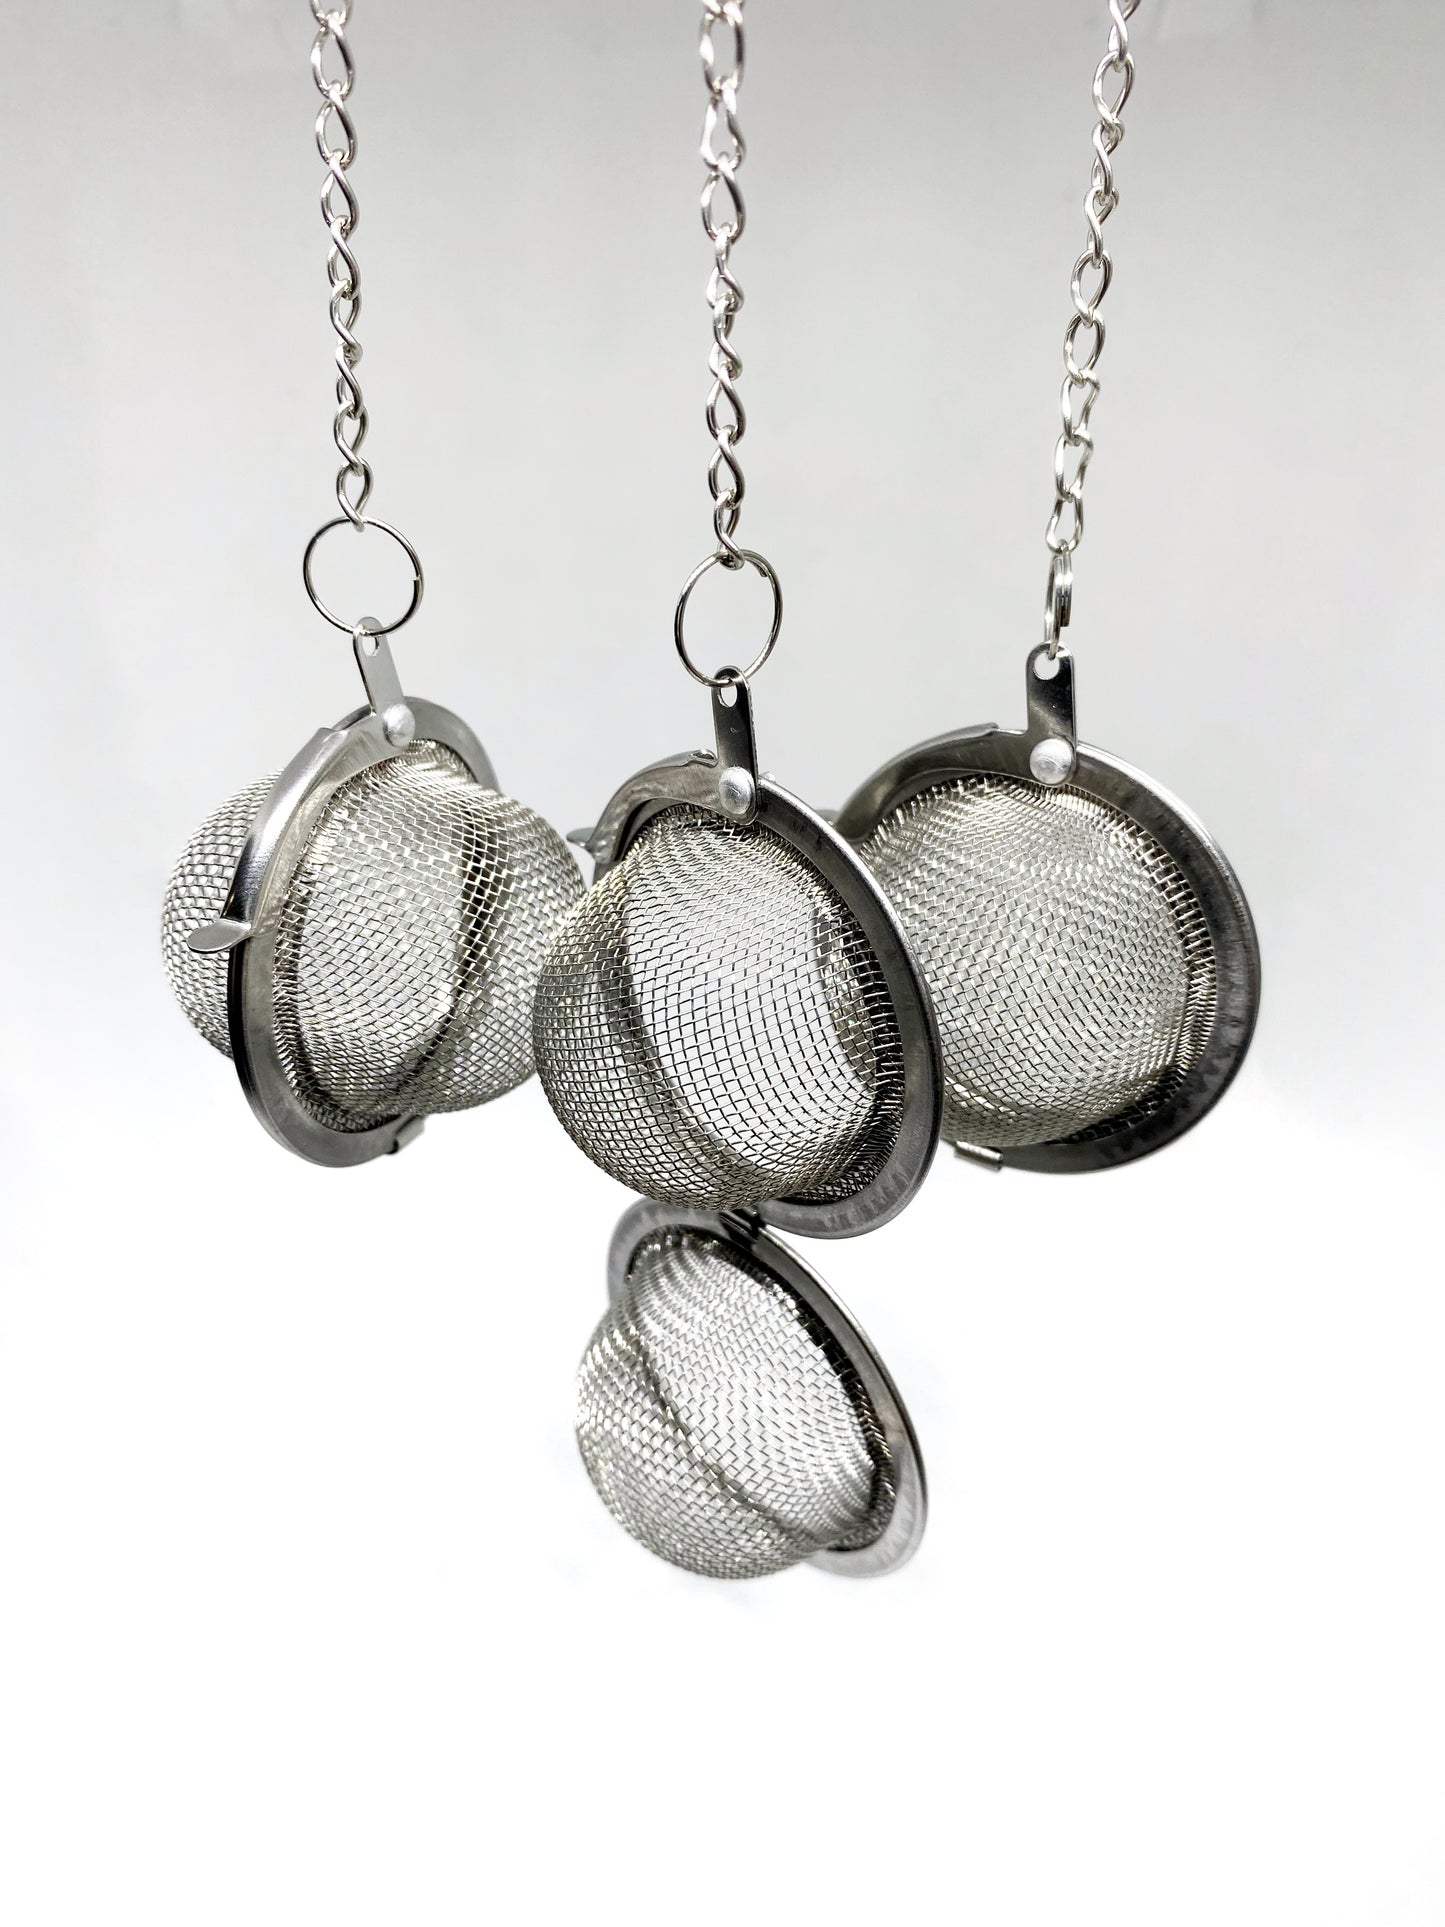 Stainless Steel Mesh Herb Infusion Strainers